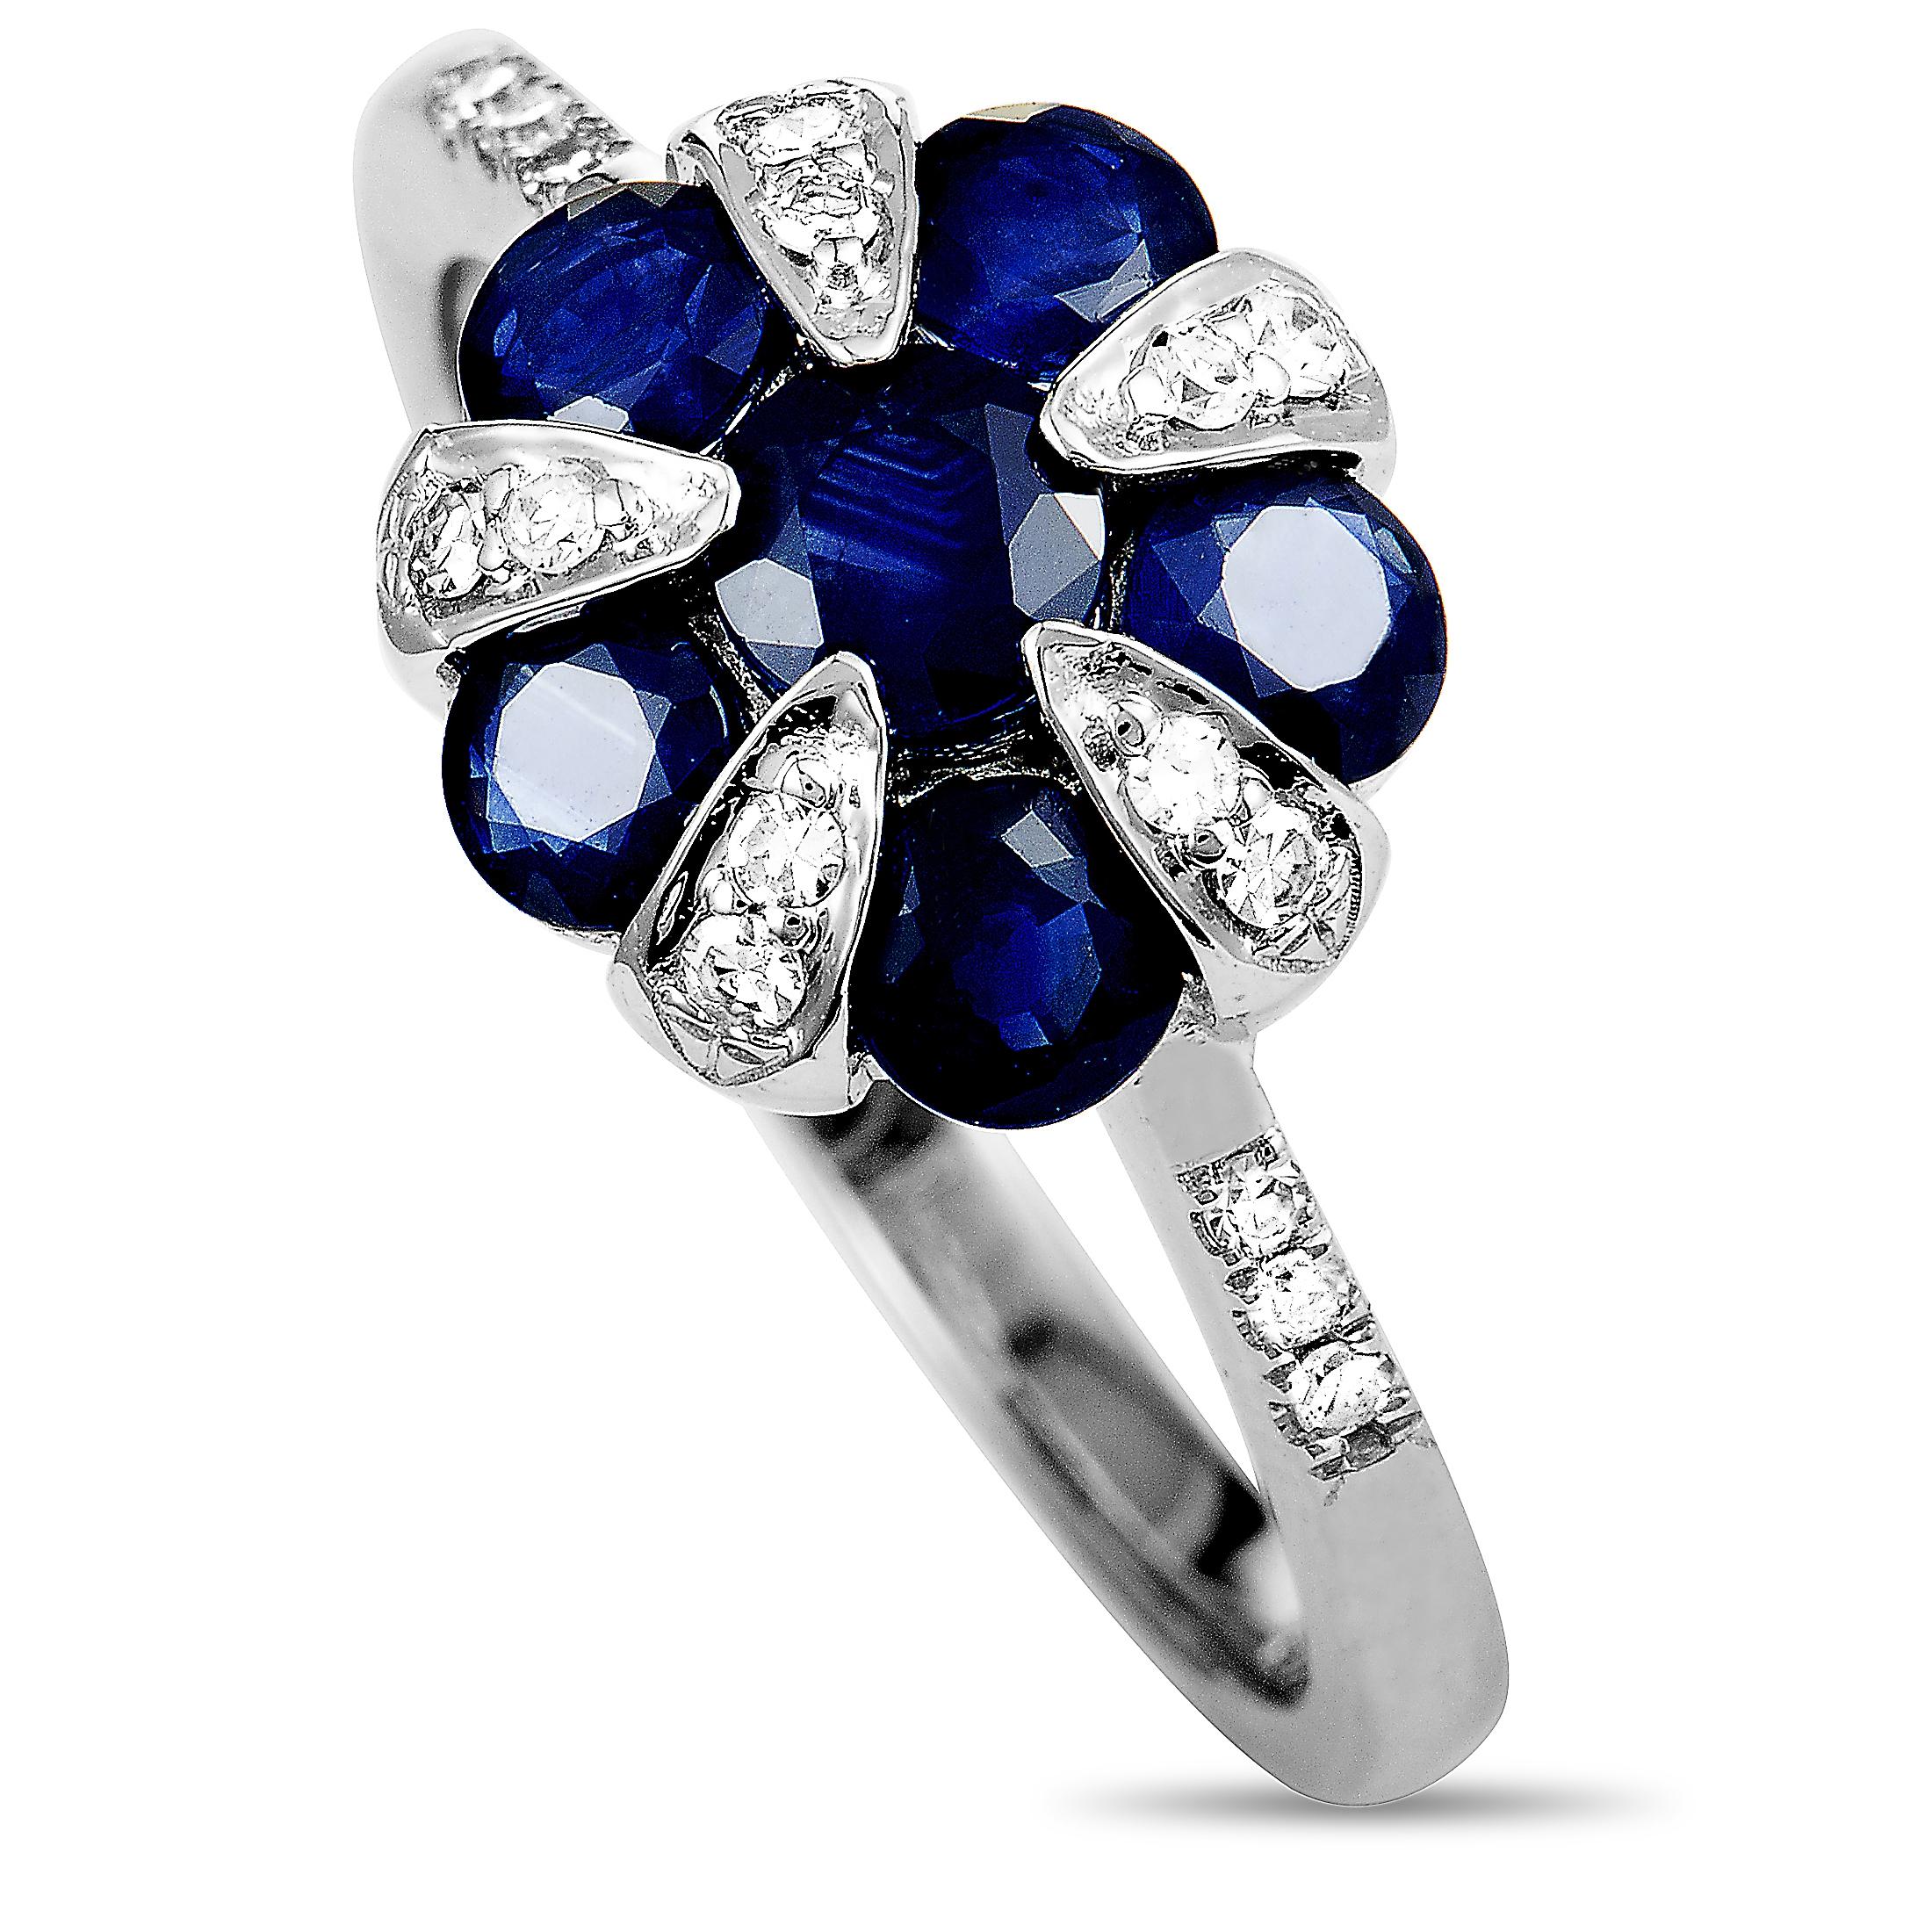 This ring is made of 14K white gold and set with sapphires and a total of 0.11 carats of diamonds. The ring weighs 3.4 grams, boasting band thickness of 2 mm and top height of 5 mm, while top dimensions measure 20 by 10 mm.
 
 Offered in brand new